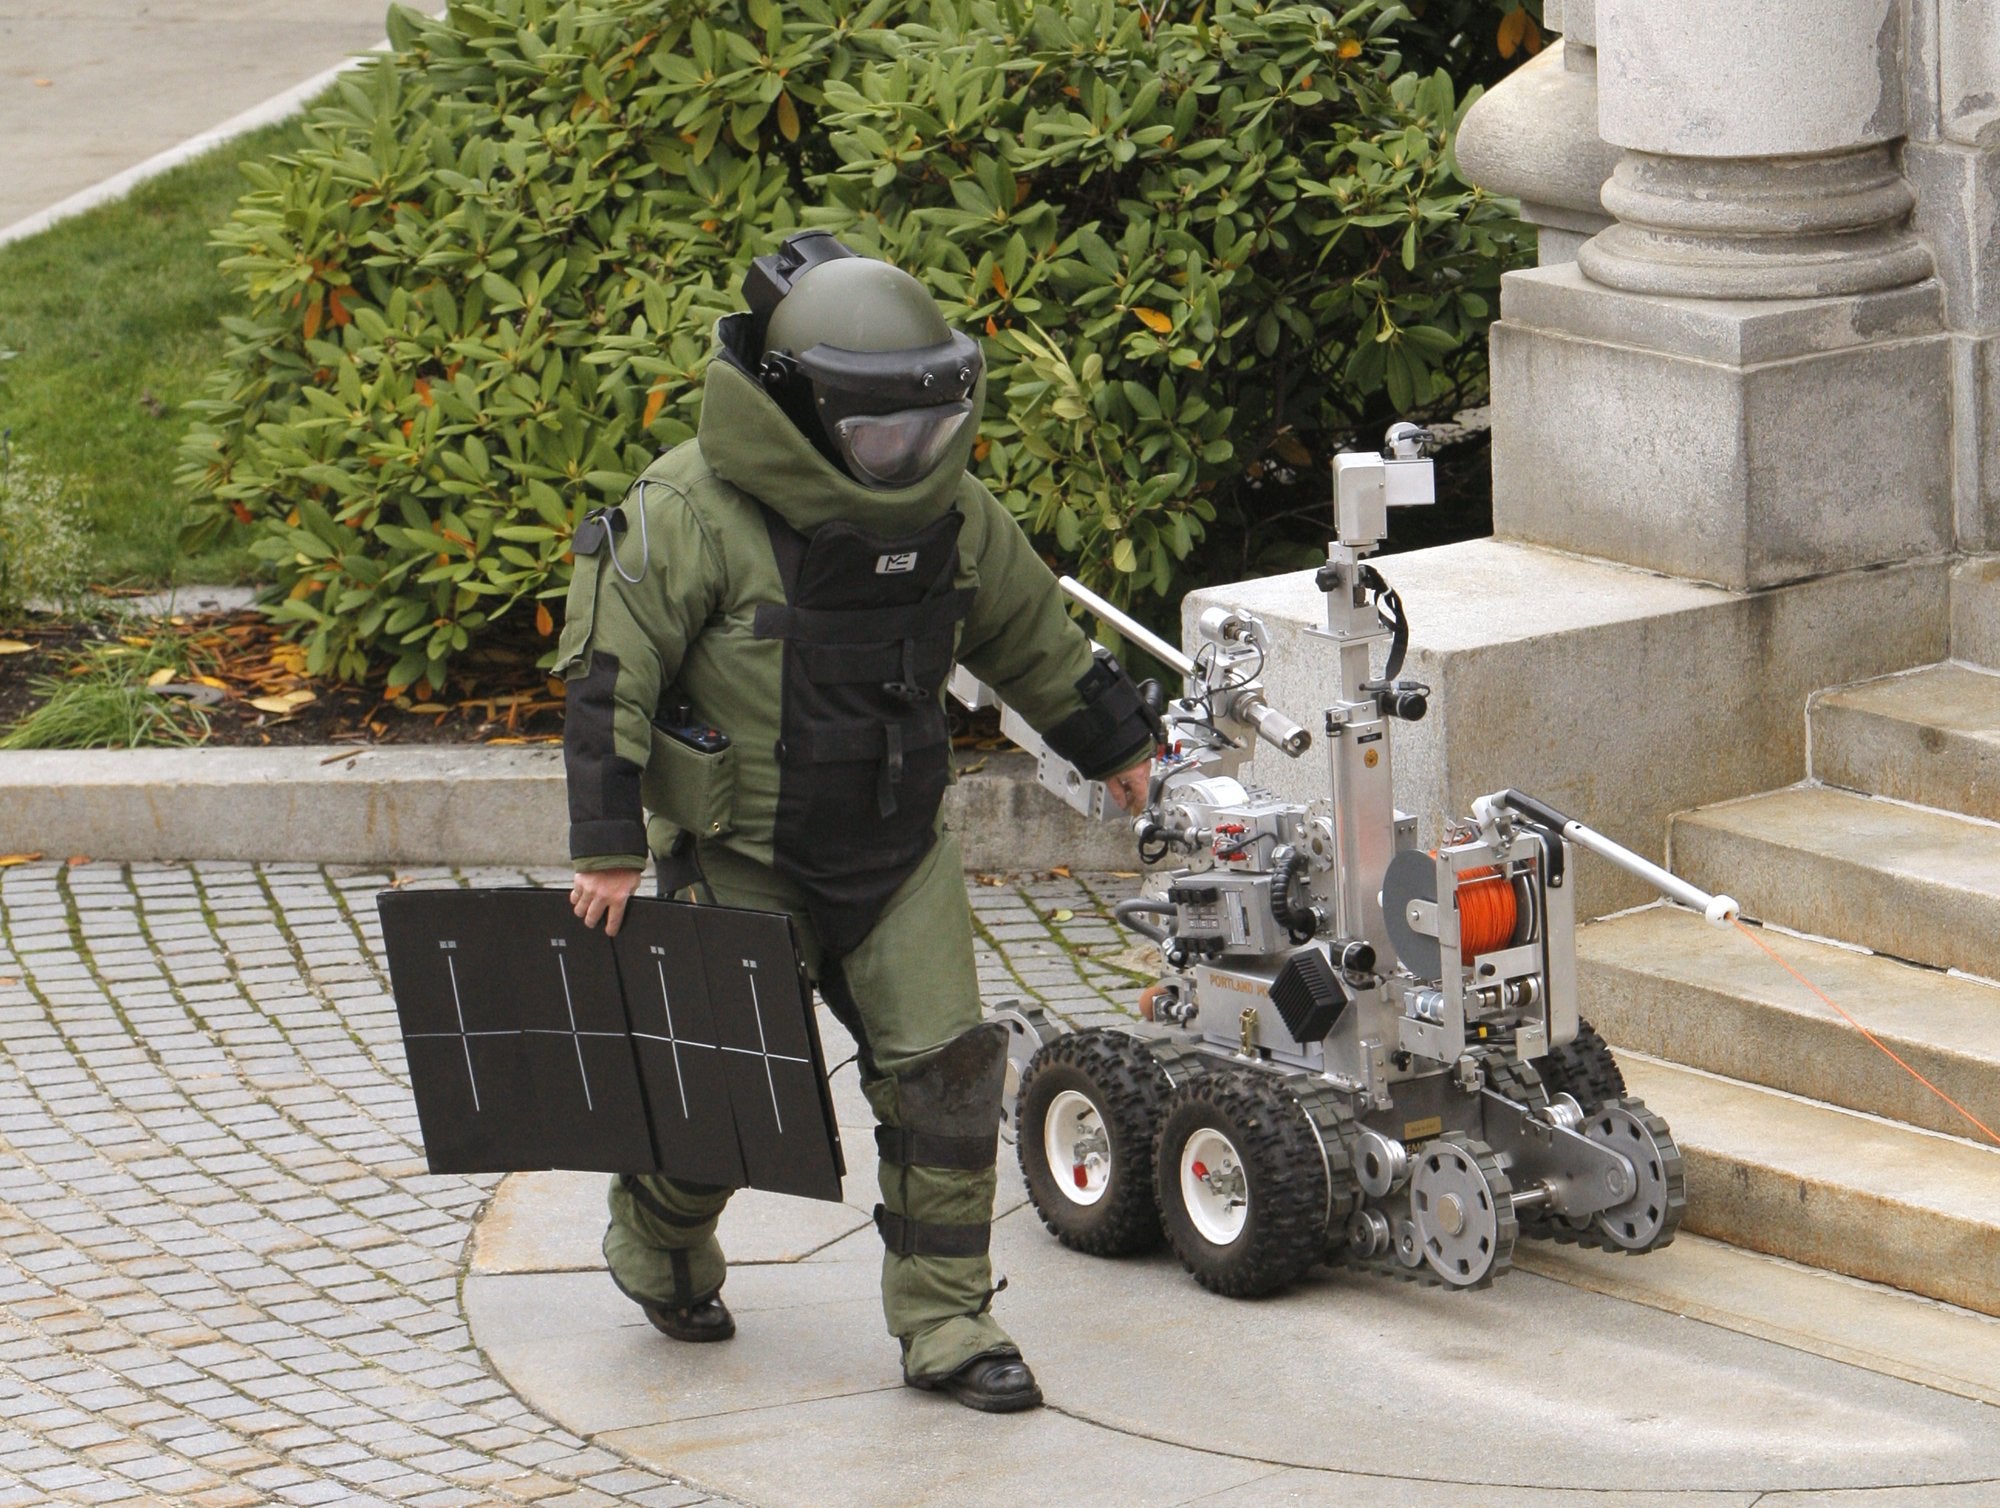 How Do Bomb Squads Assess a Suspicious Package? | Scientific American